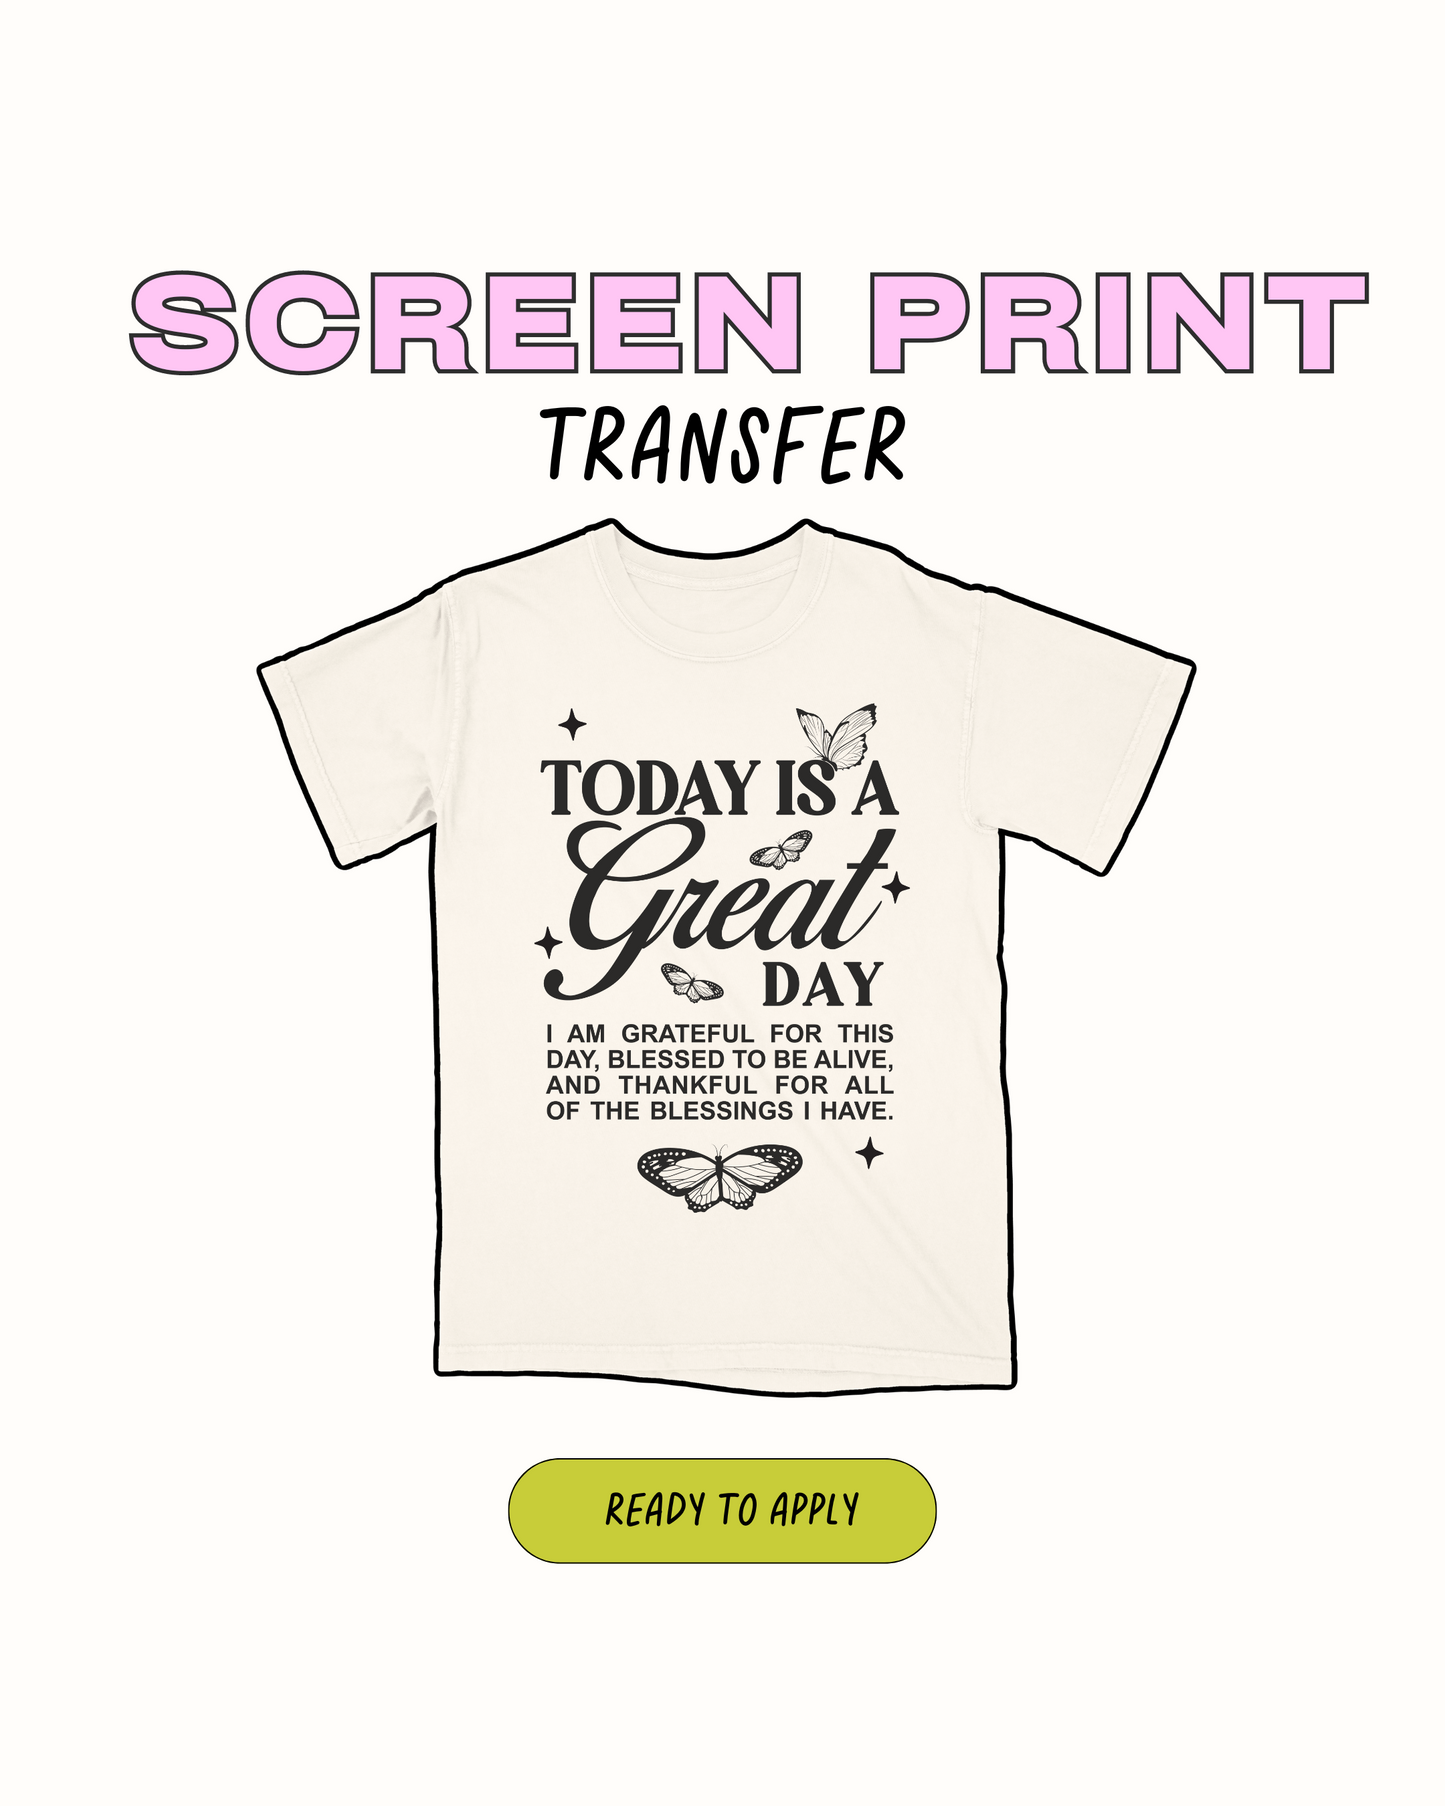 Today is a Great Day - Screen print (RTS)